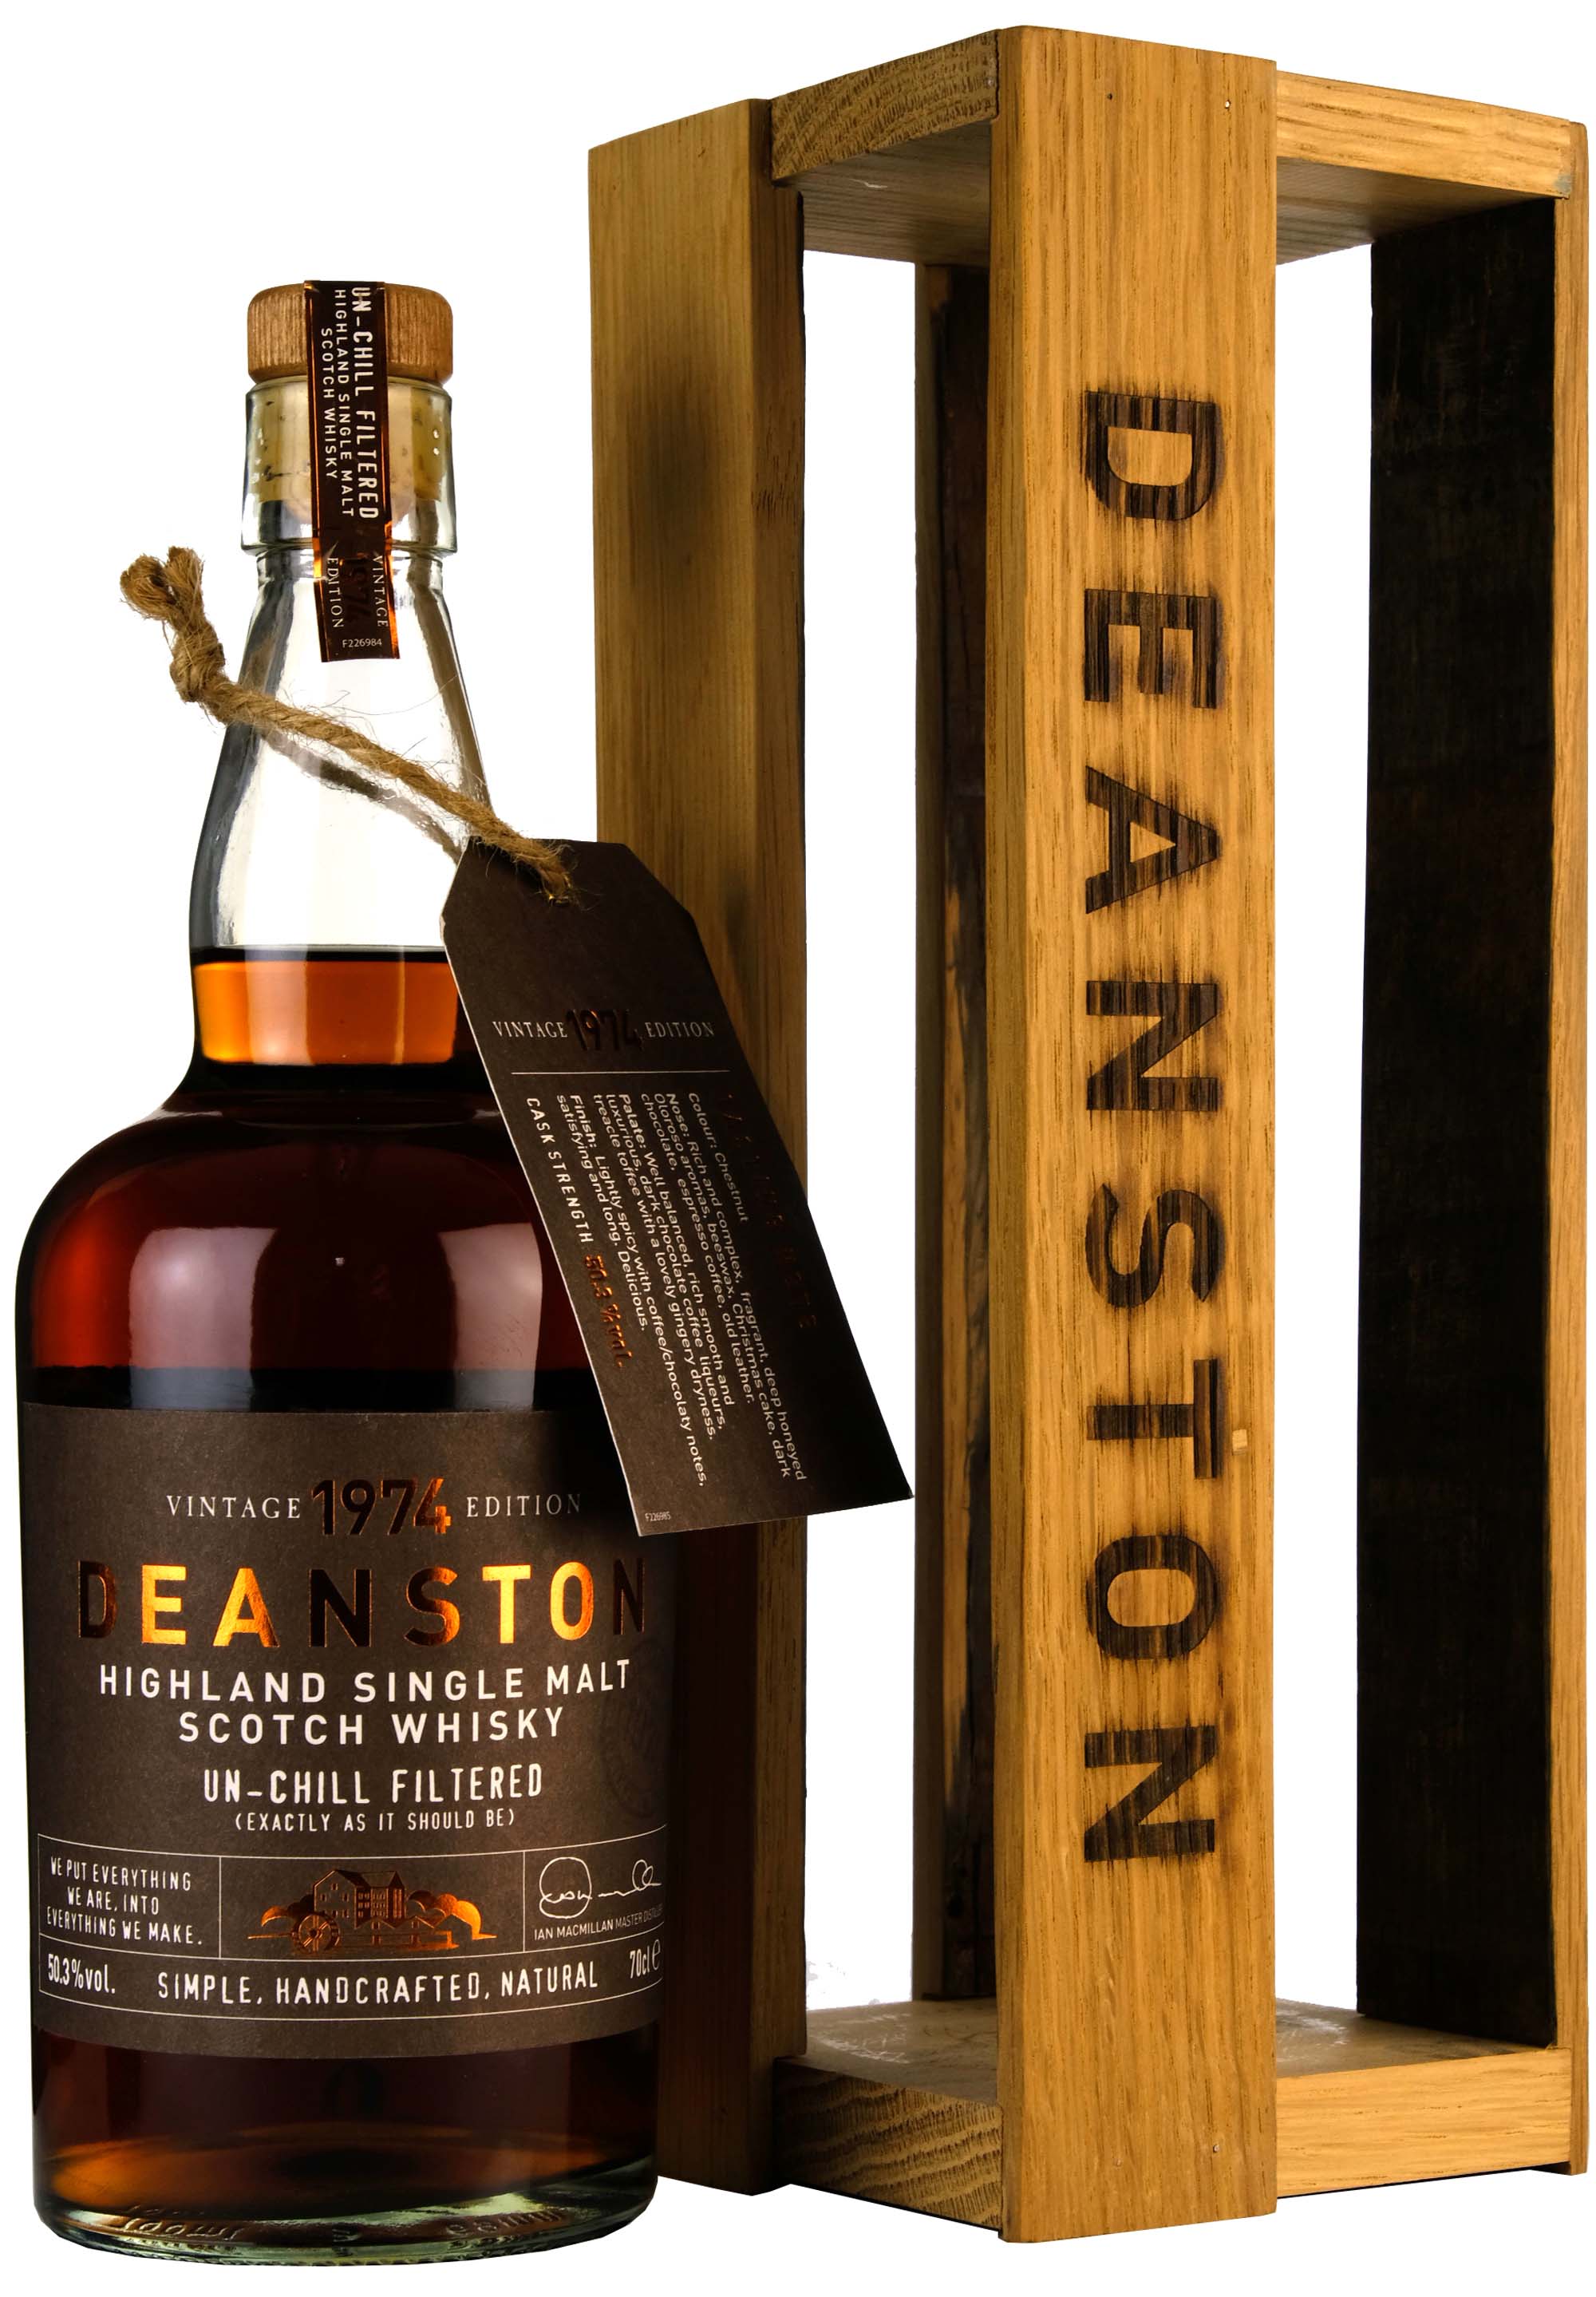 Deanston 1974 Vintage Edition 37 Year Old